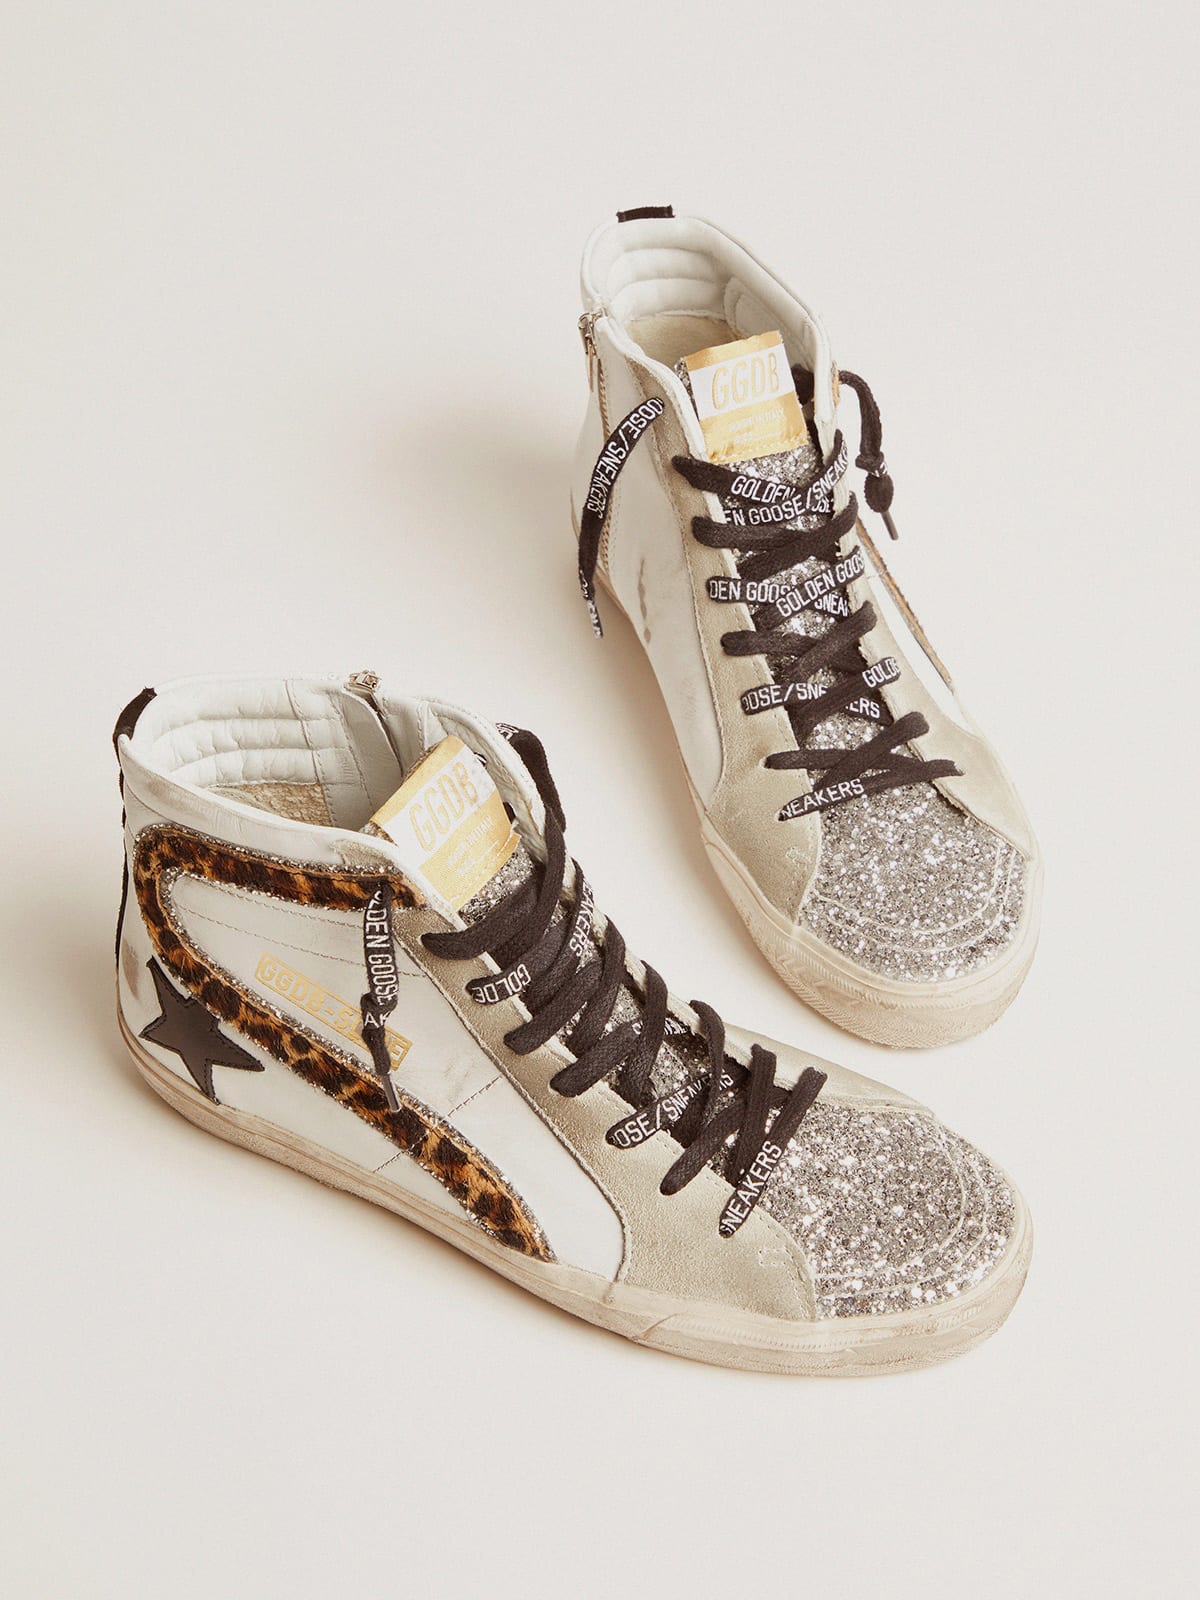 Slide sneakers with glitter and leopard-print flash | Golden Goose